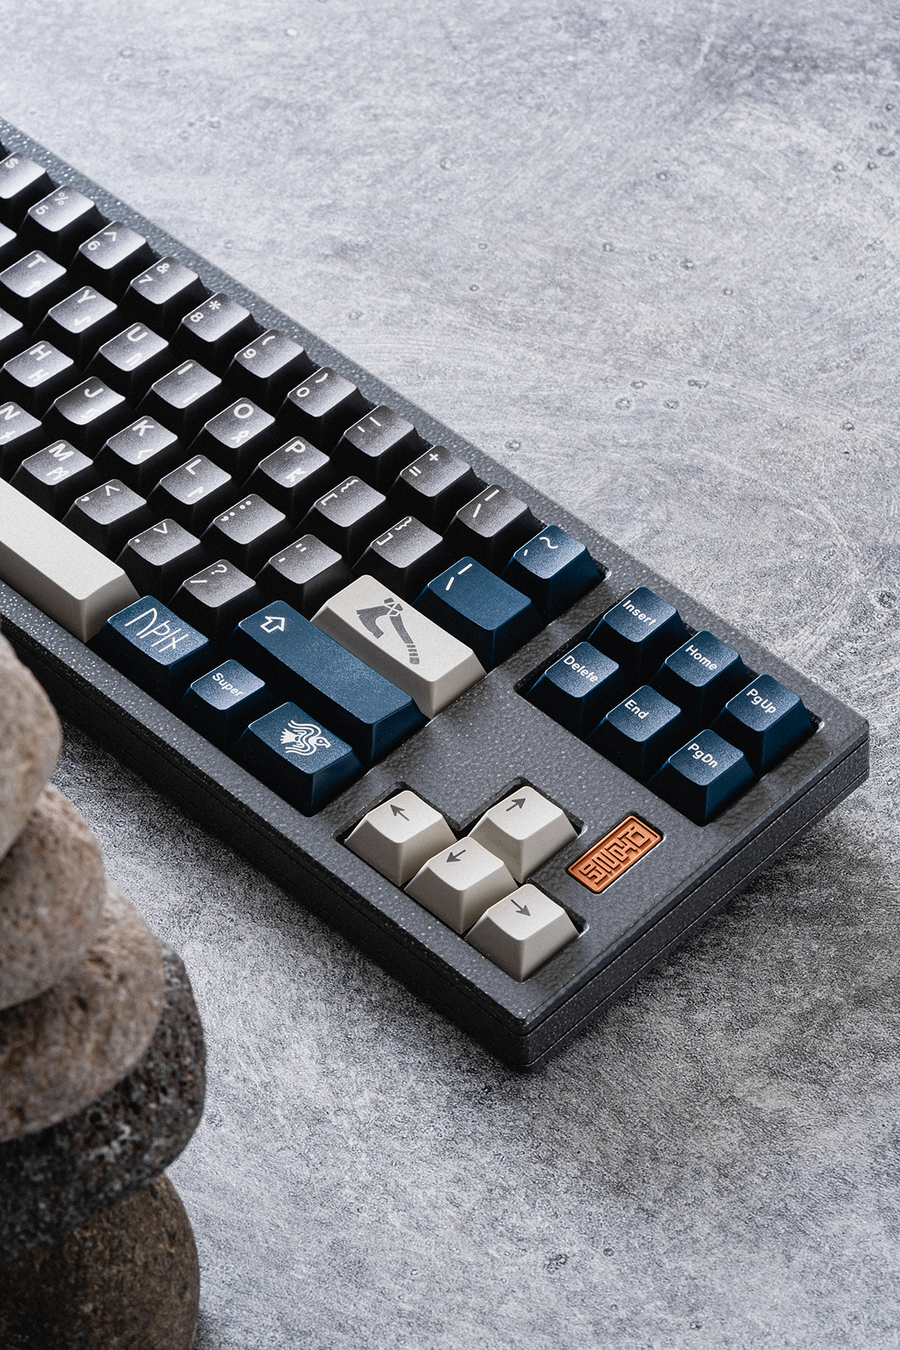 GMK Norse Keycaps (CYL)